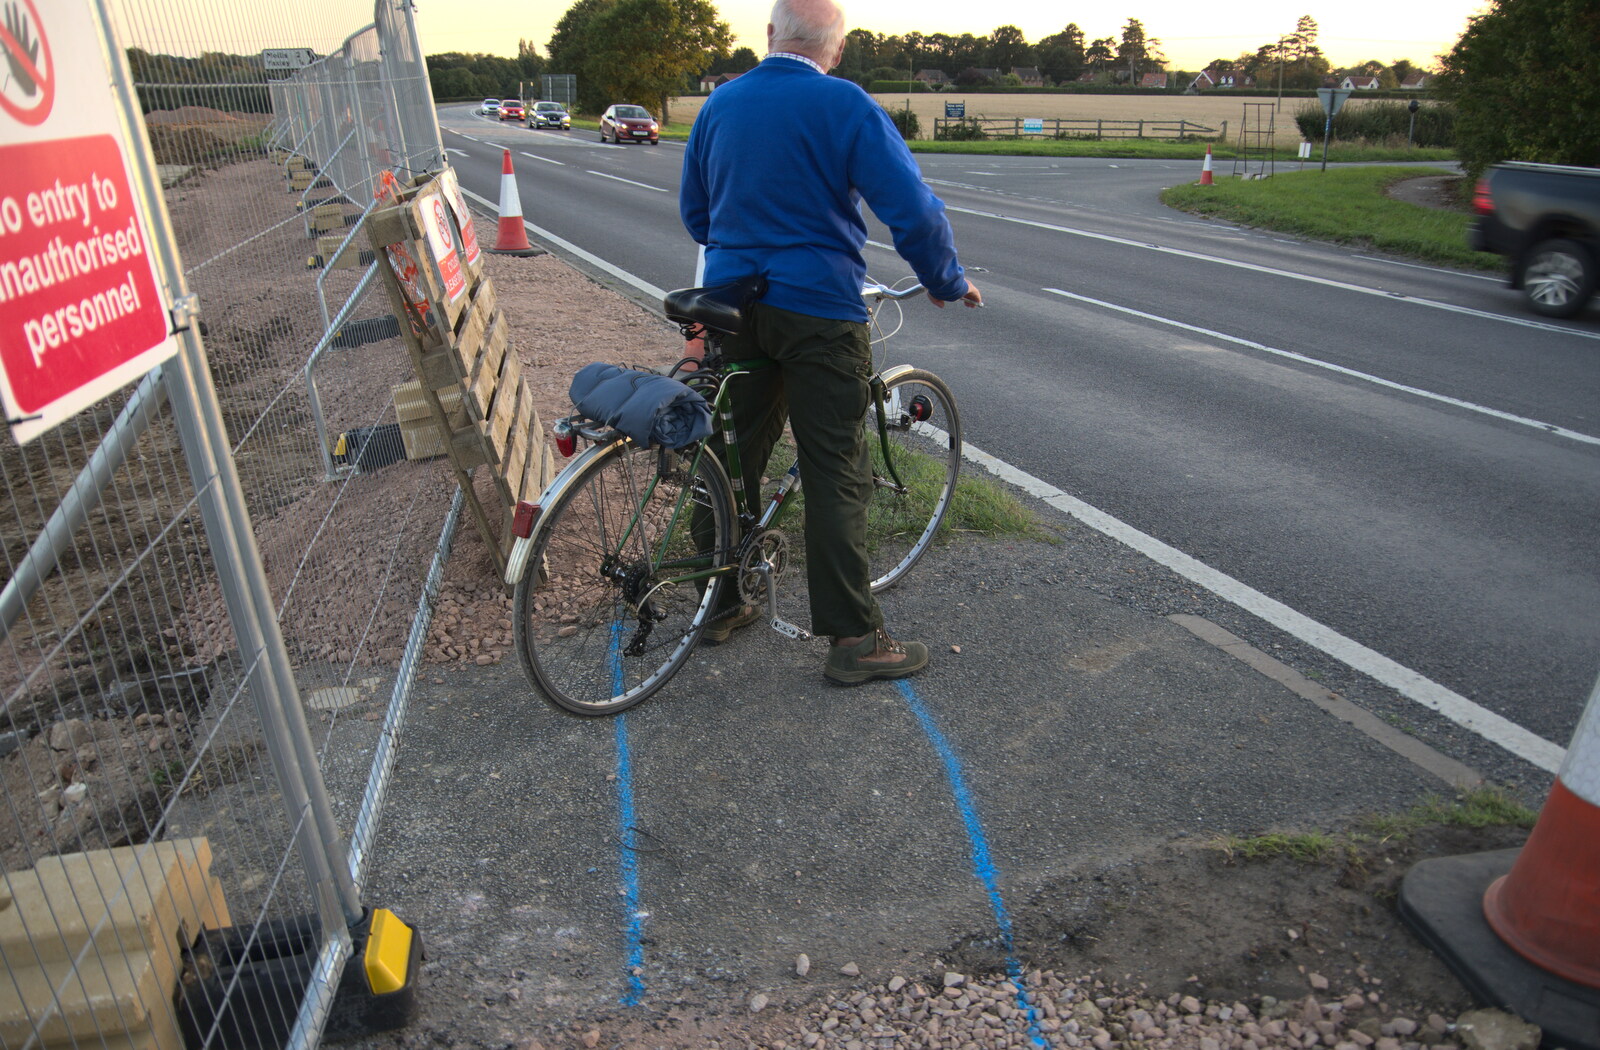 Mick waits to cross the A140 from Cycling Eye Airfield and Station 119, Eye, Suffolk - 9th September 2020